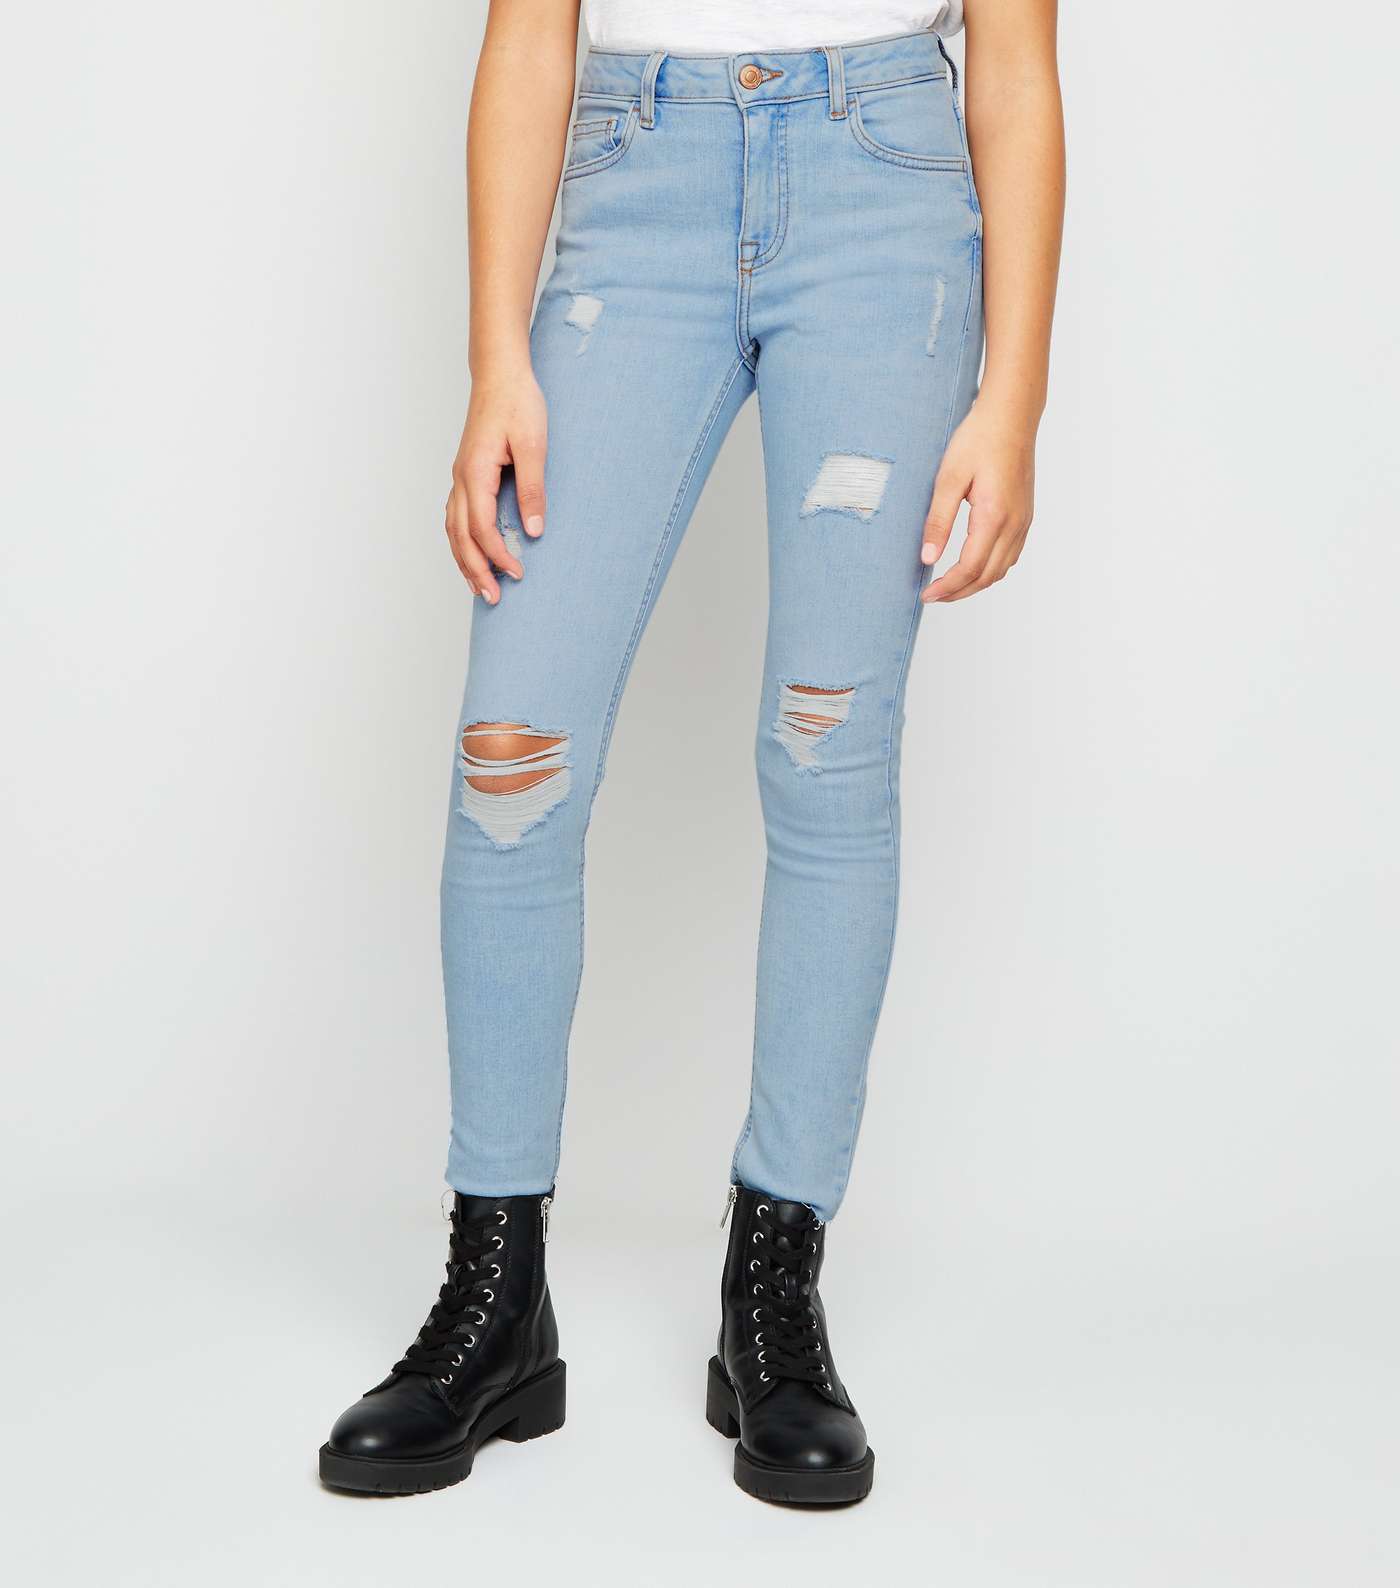 Girls Pale Blue Bleach Ripped Skinny Jeans Image 2